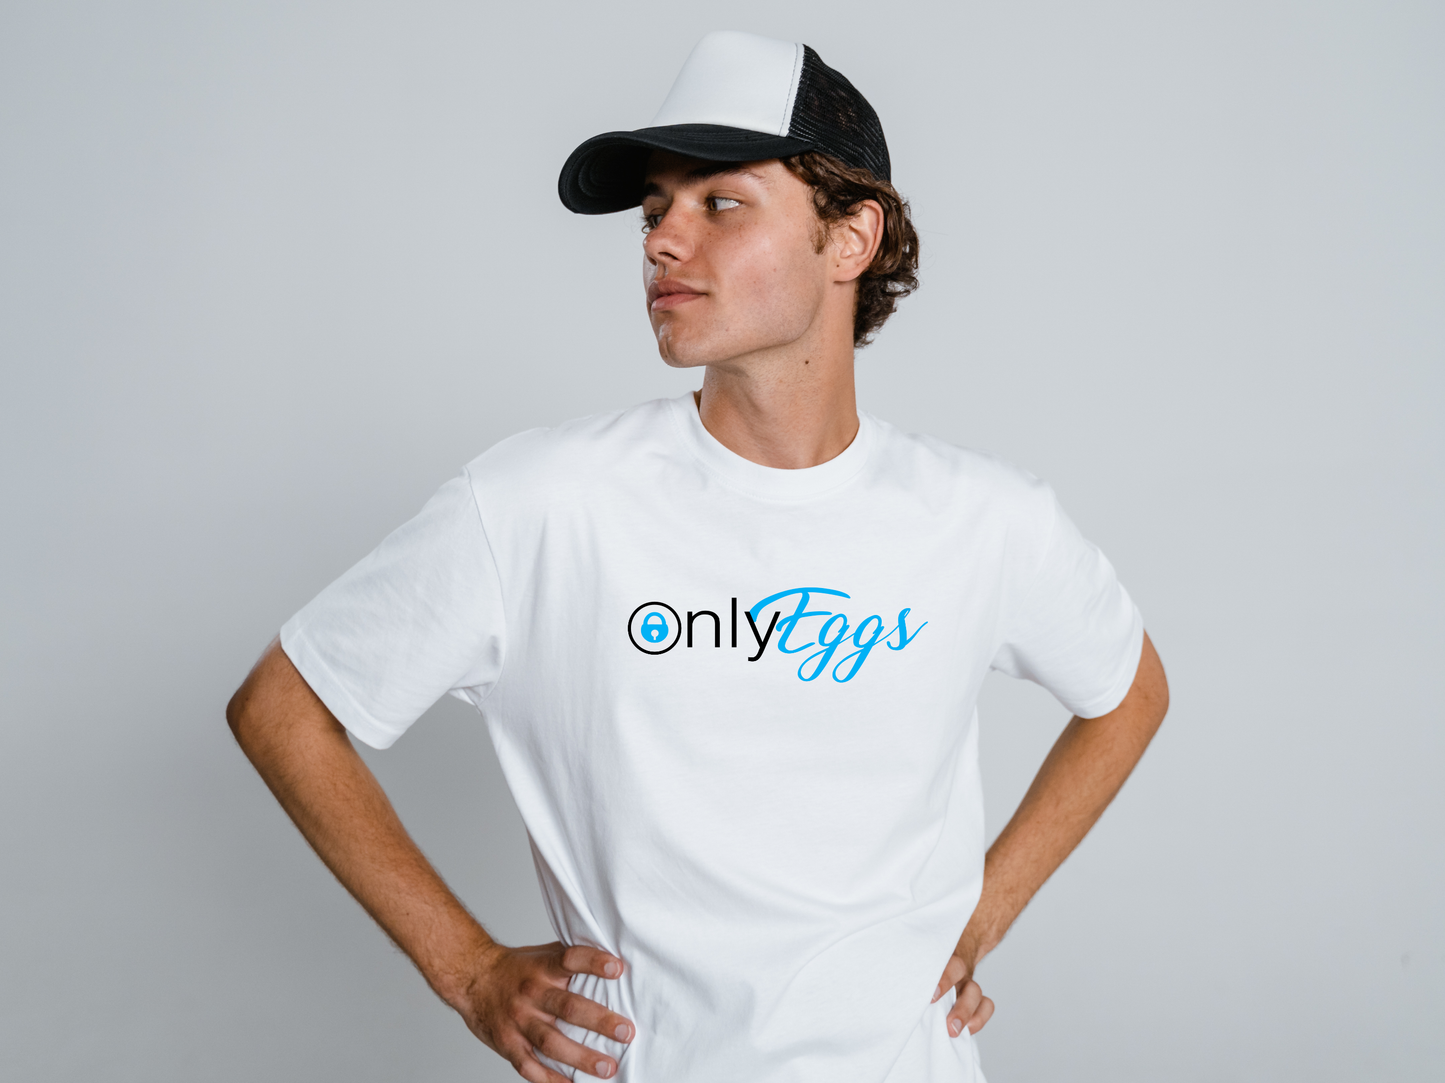 OnlyEggs Vinyl Printed Luxury Short Sleeved T-Shirt- Very limited Edition